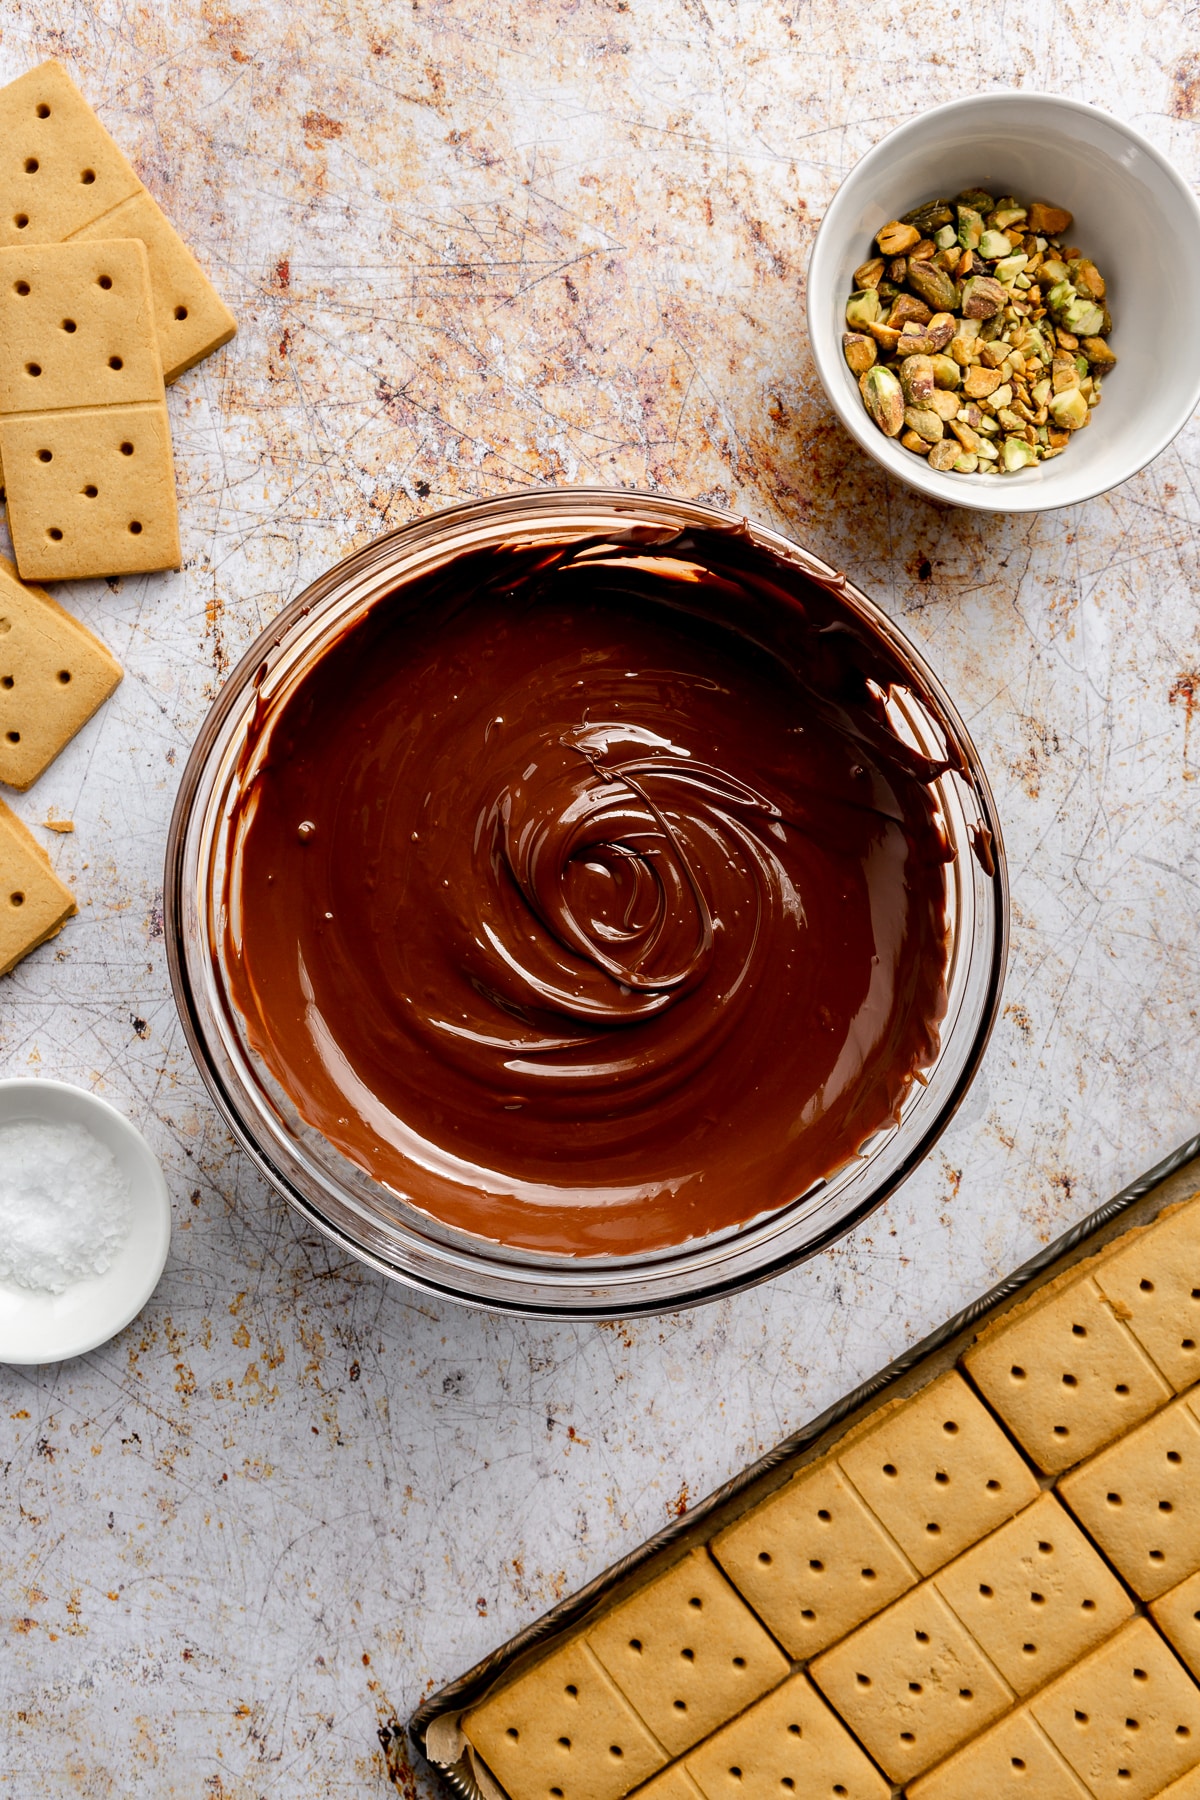 Melted chocolate sits in a glass bowl. The tray of graham crackers and a bowl of pistachios sit to the side.